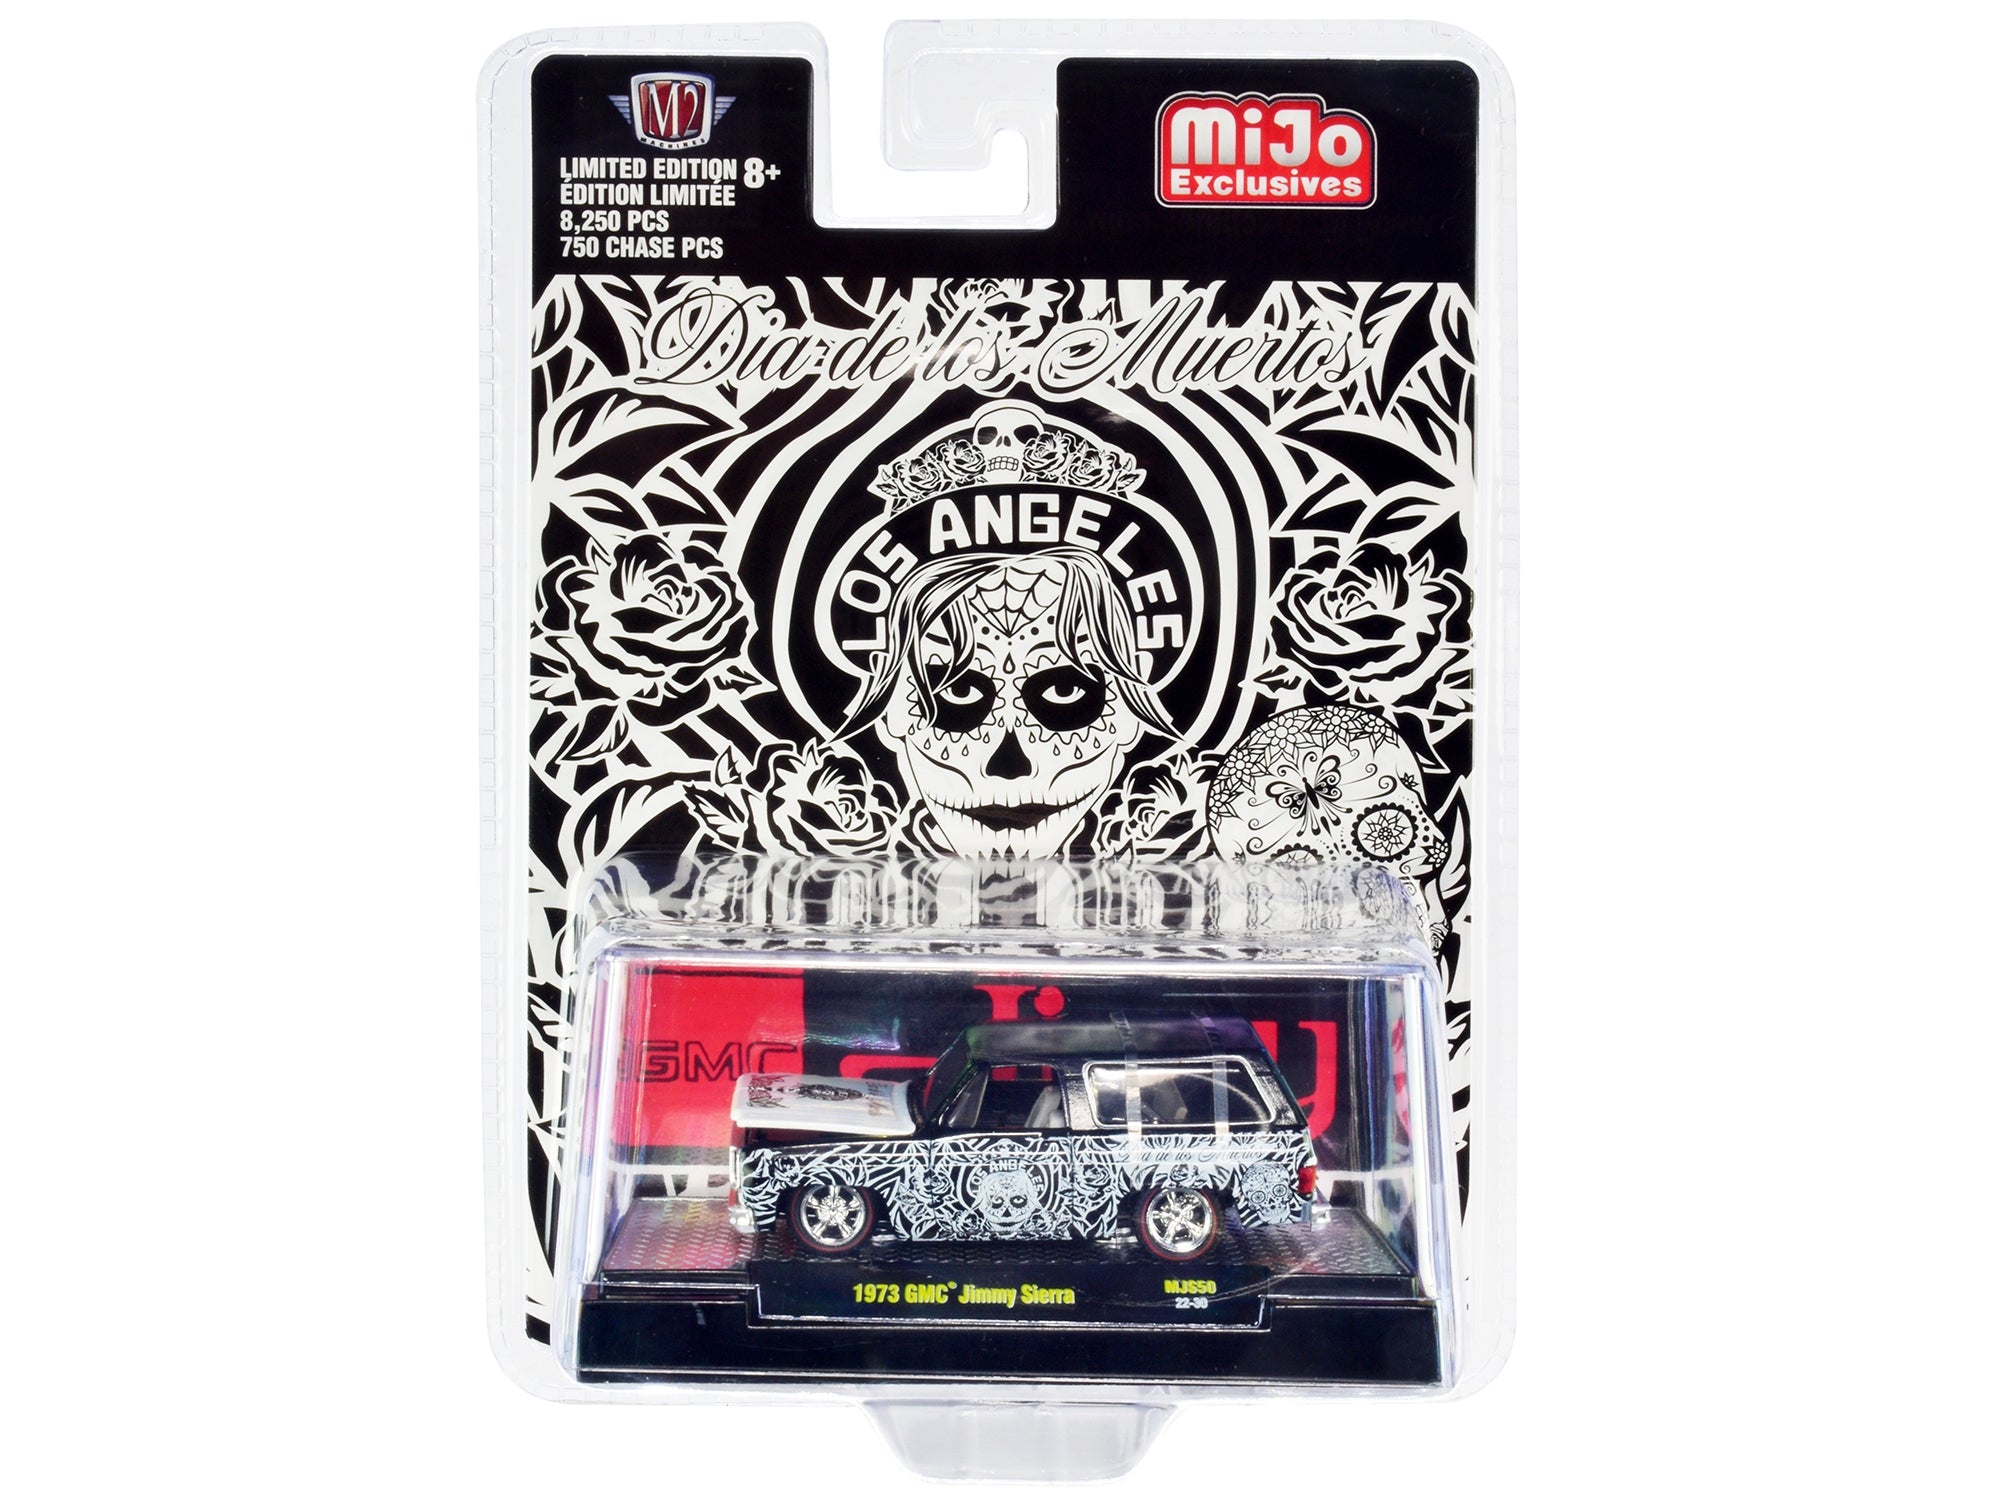 1973 GMC Jimmy Sierra Black with Graphics "Dia De Los Muertos - Los Angeles" (Day of the Dead) Limited Edition to 8250 pieces Worldwide 1/64 Diecast Model Car by M2 Machines